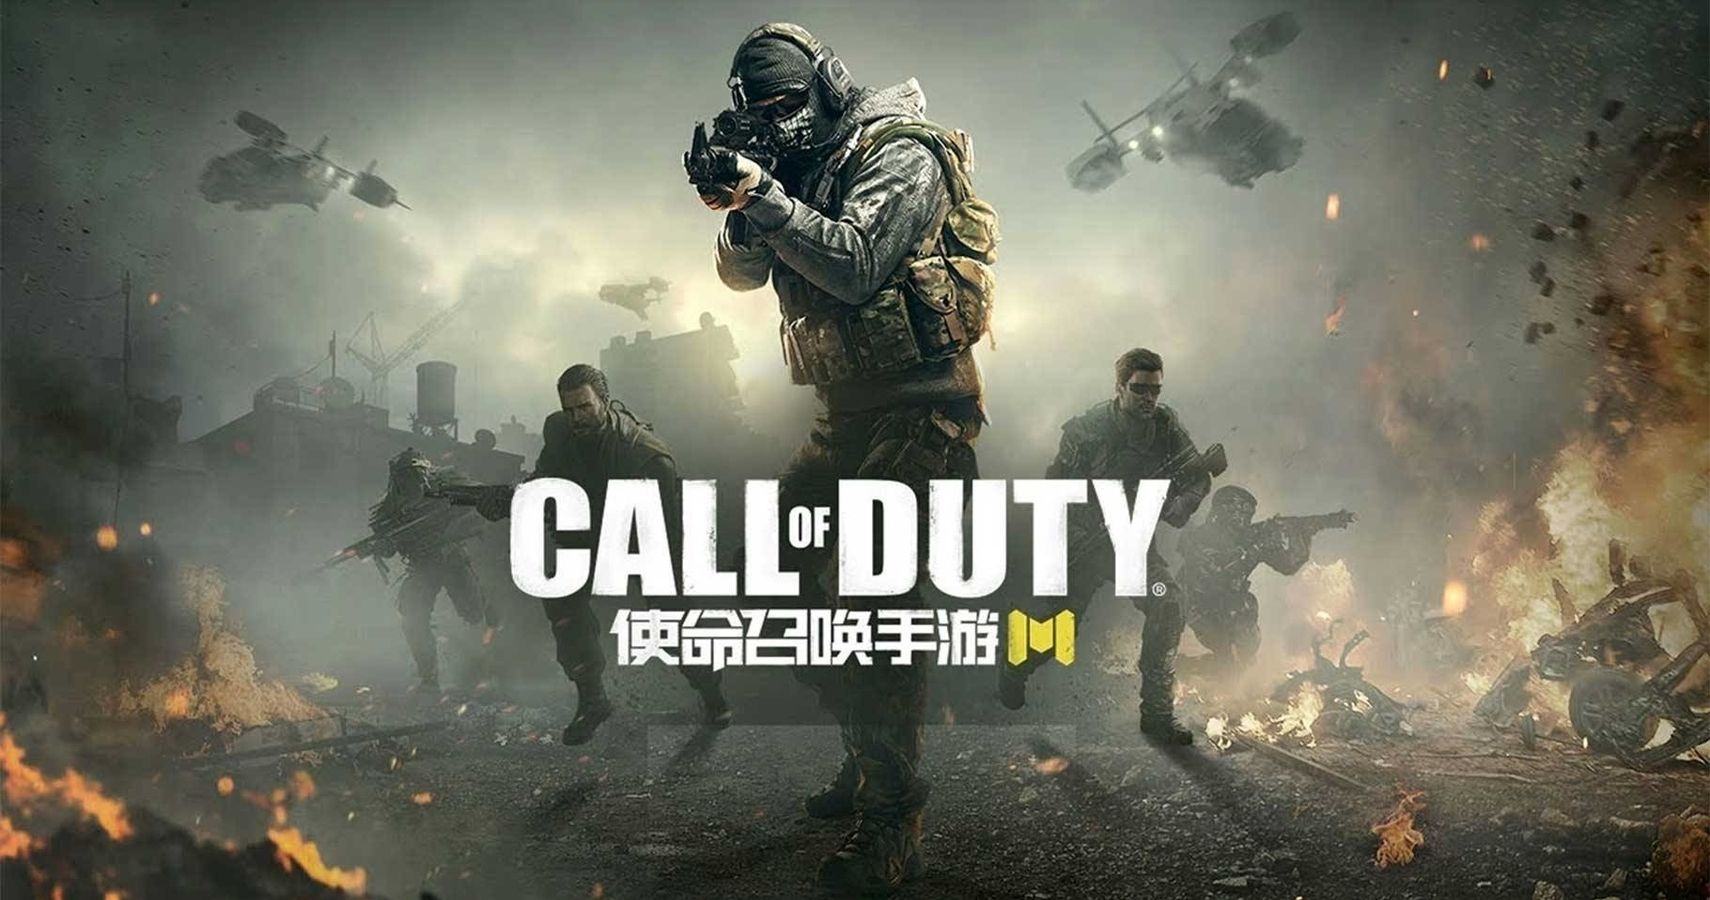 Call of Duty Mobile in China huge hit for Activision